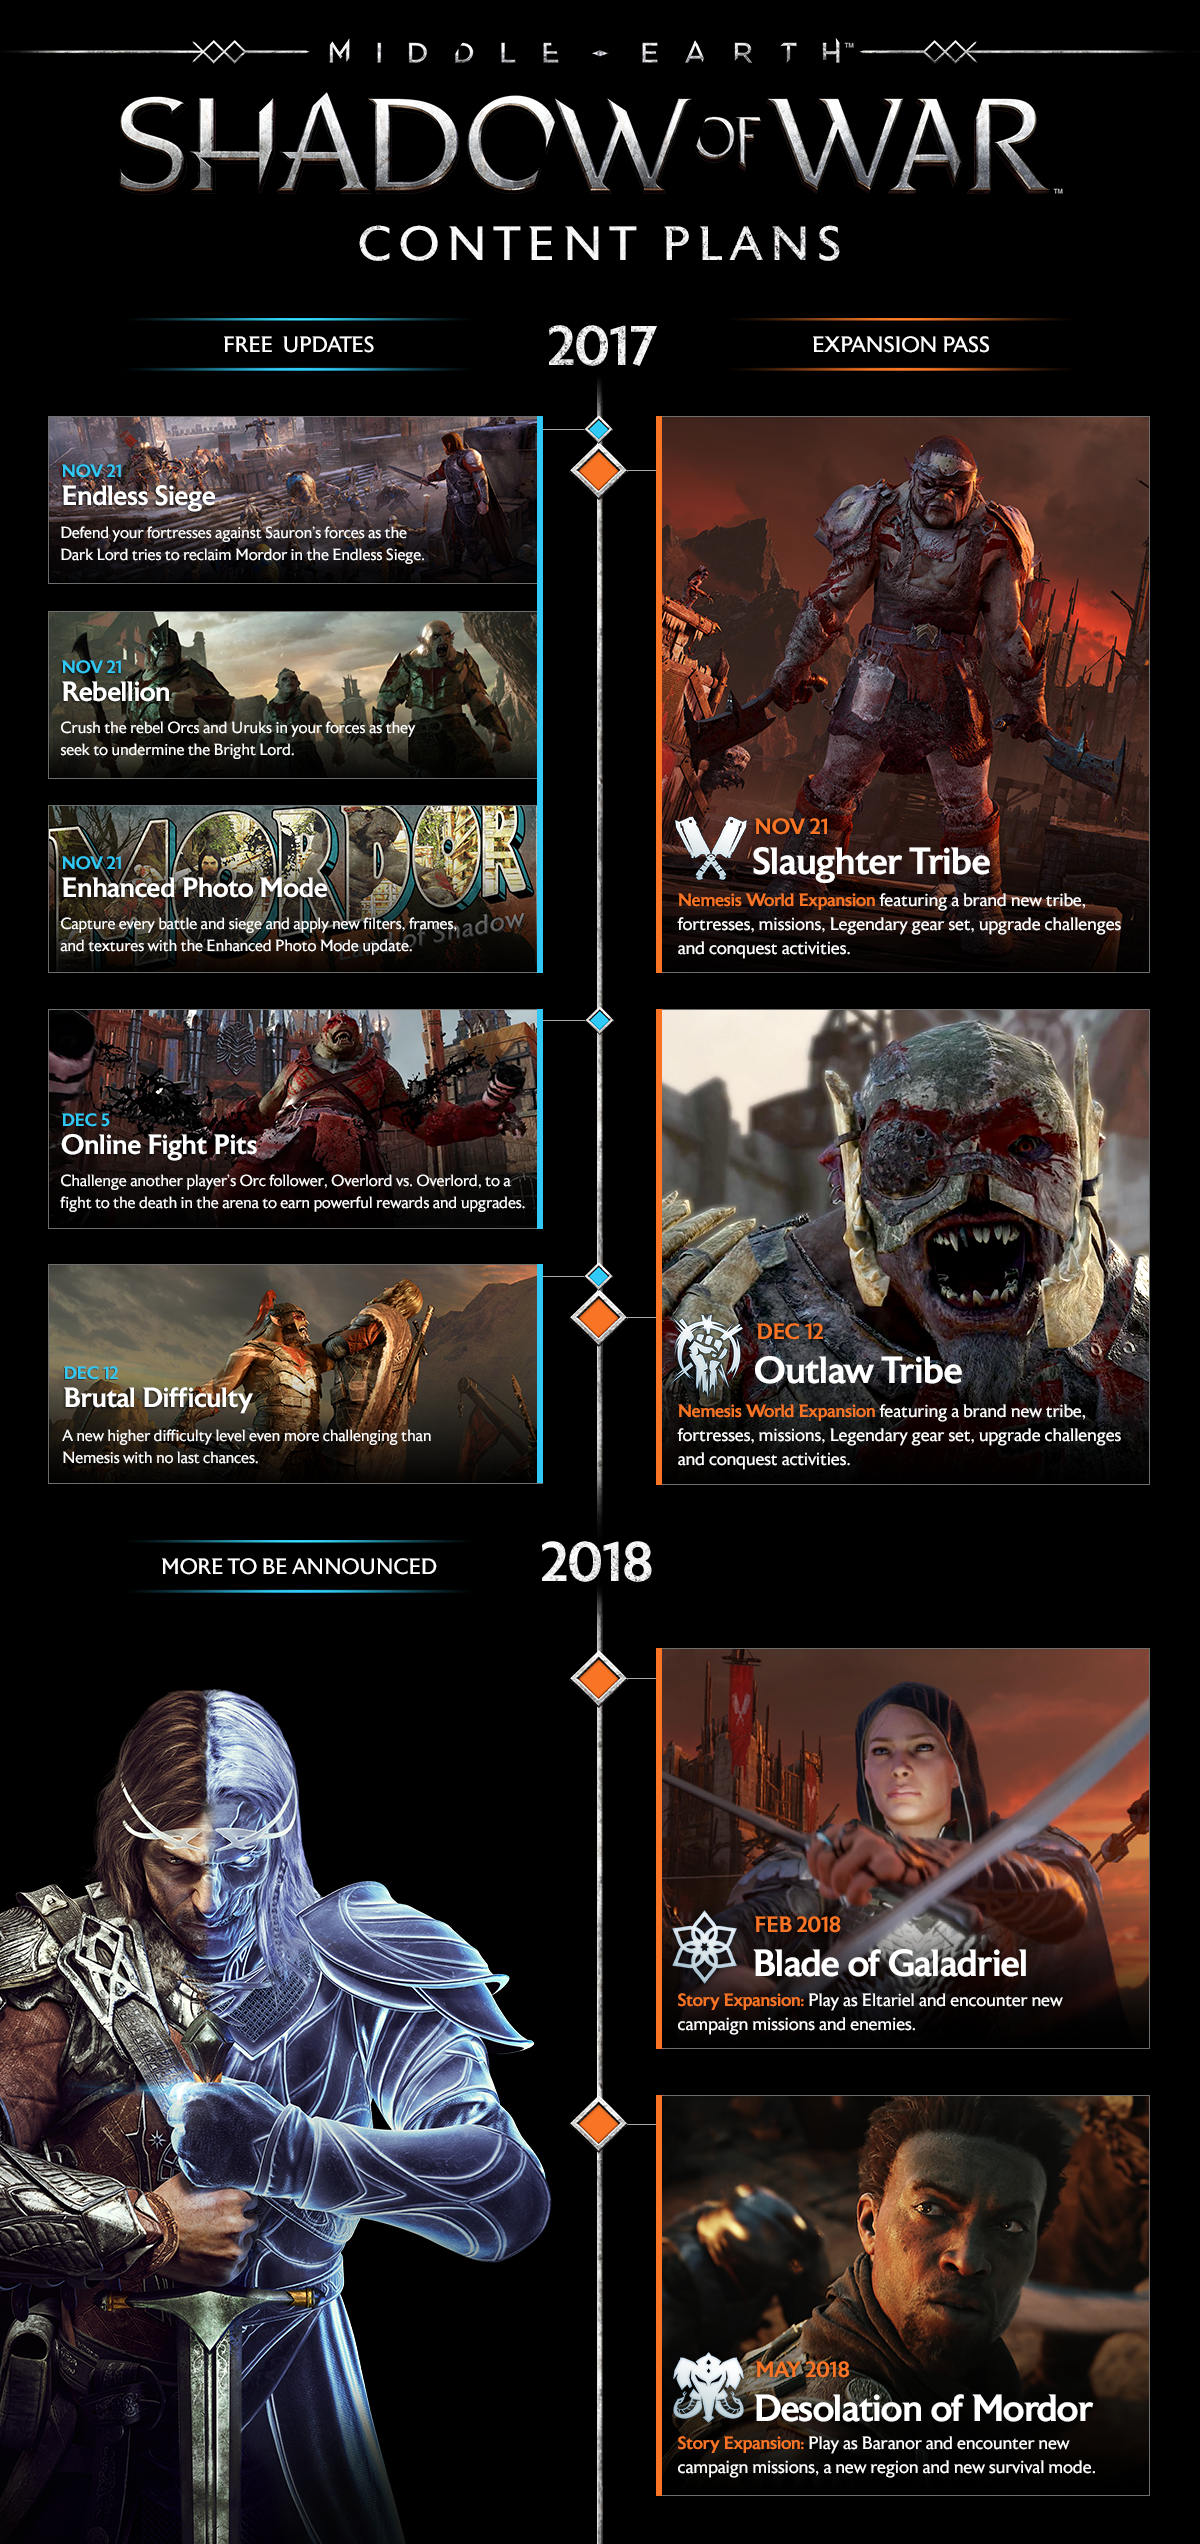 Warner Bros. Middle-Earth: Shadow of War for PlayStation 4 - image 3 of 6